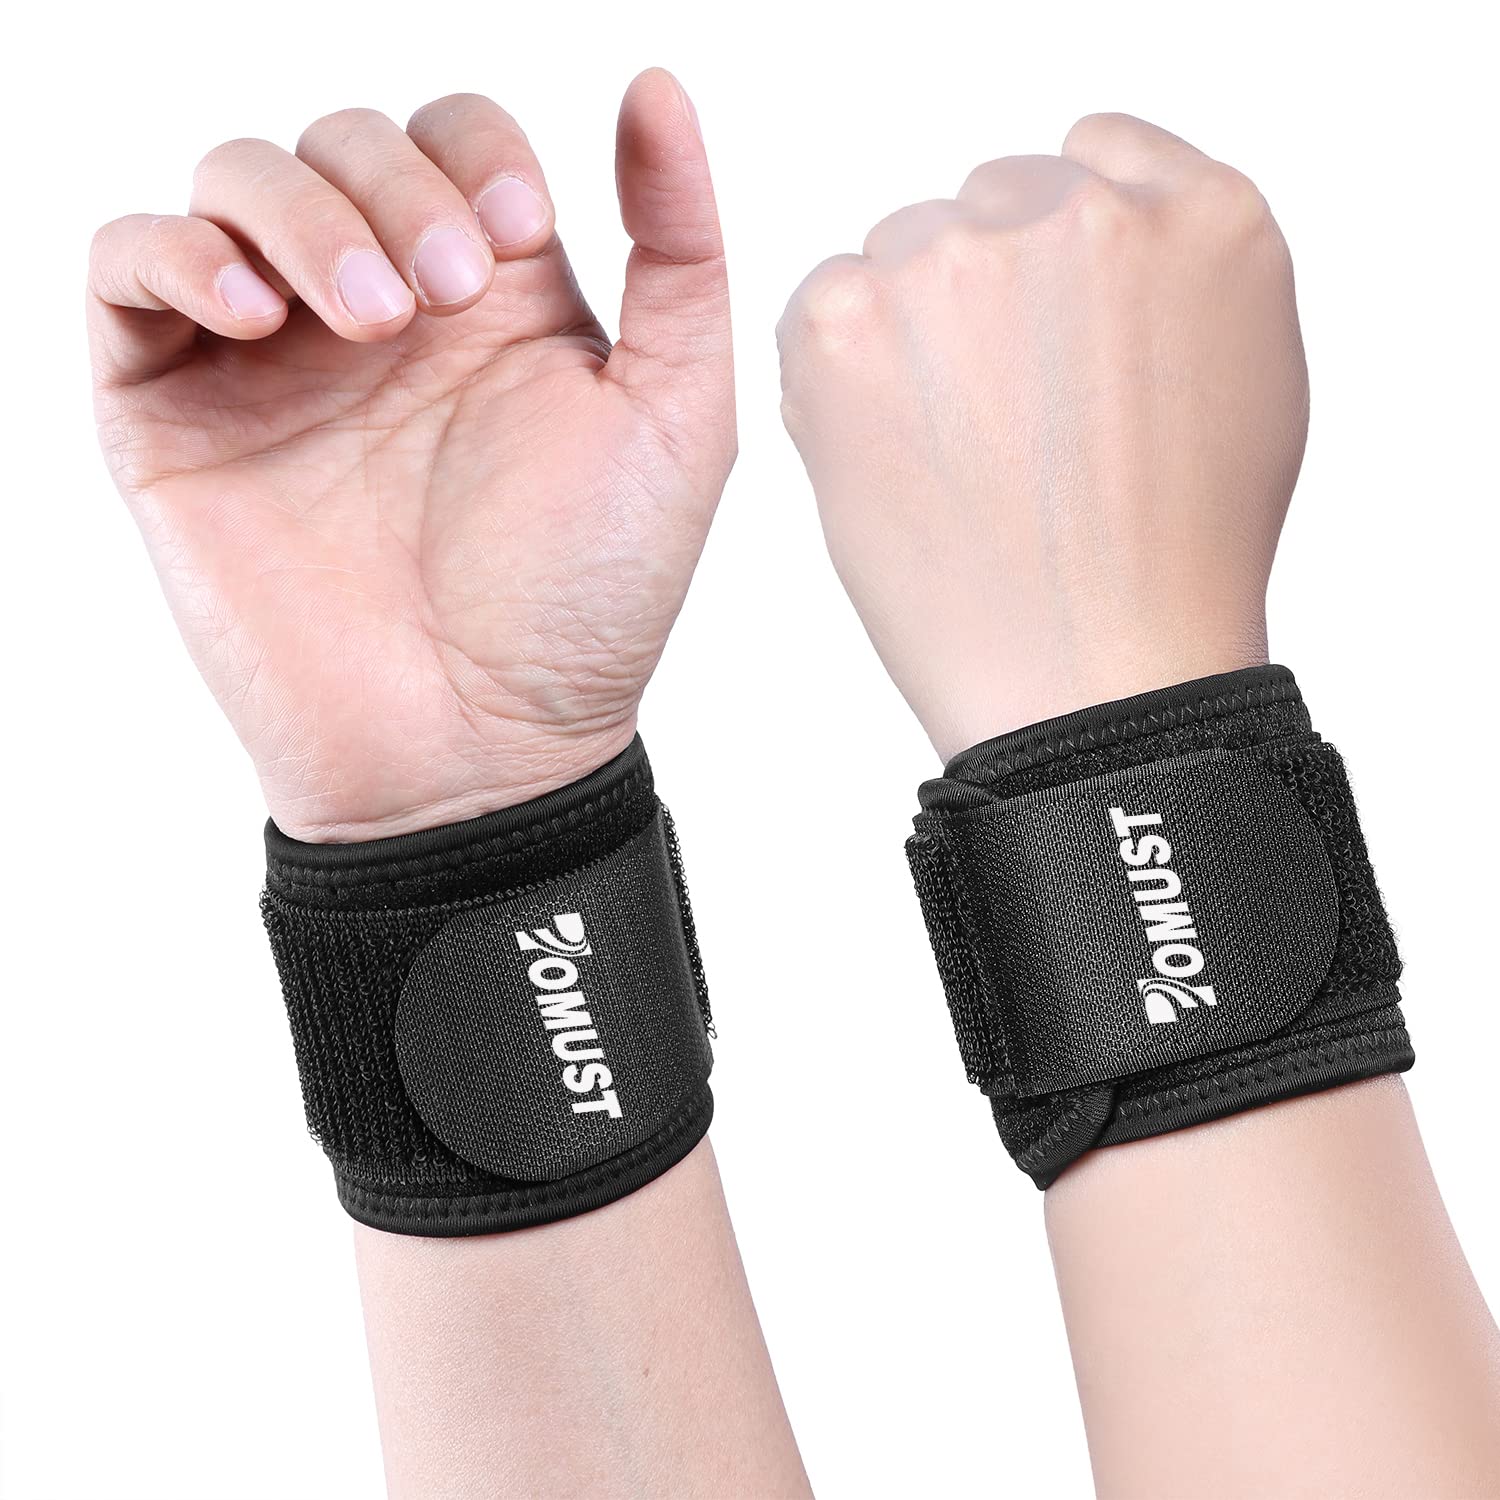 2PCS Weightlifting Wrist Straps Strength Training Adjustable Non